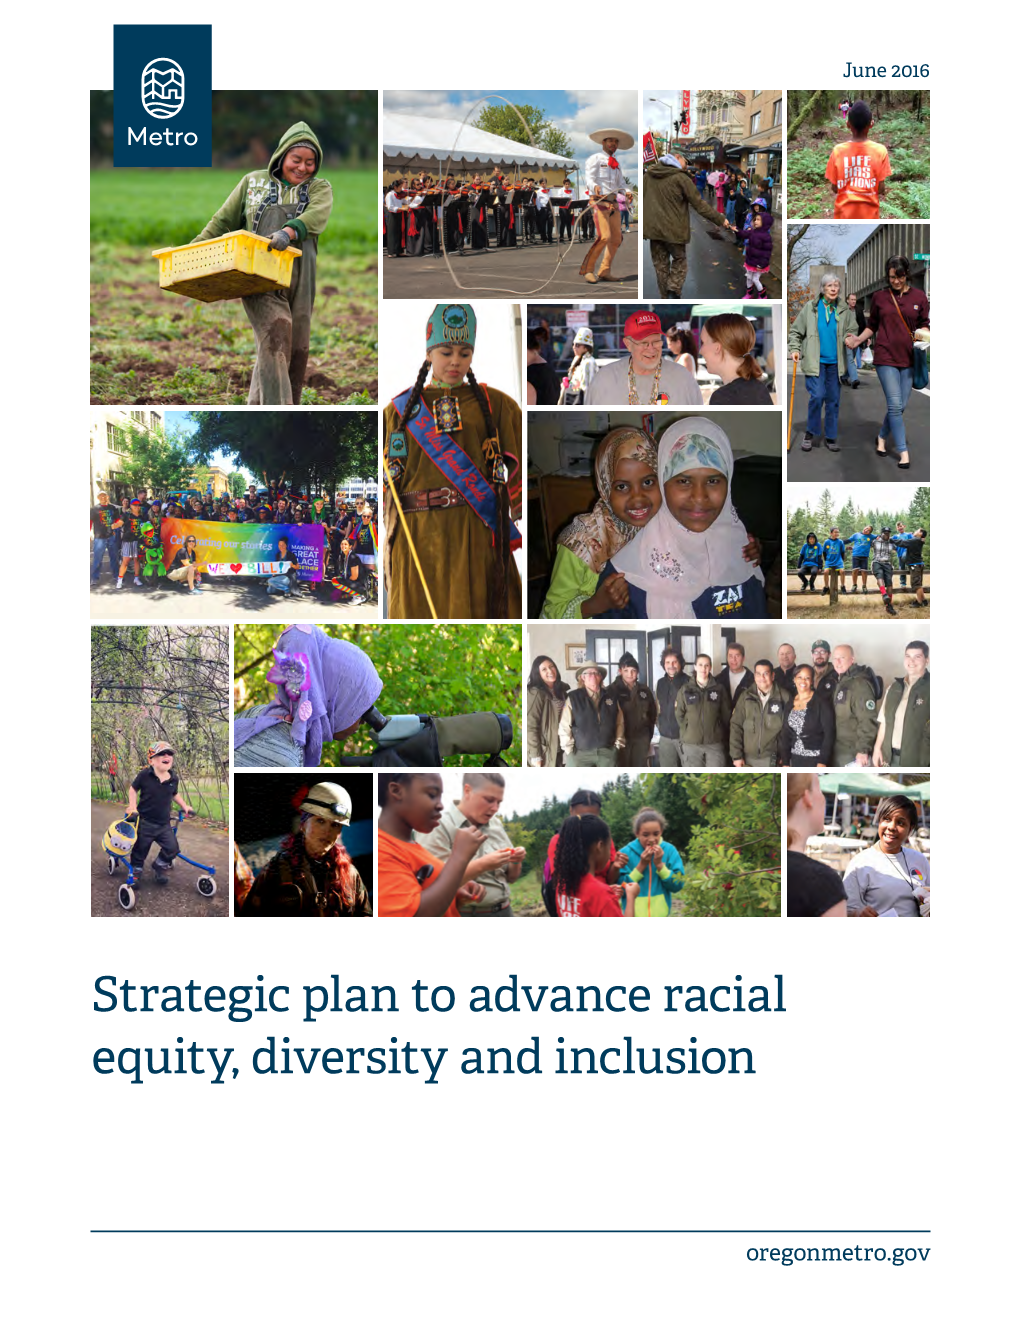 Strategic Plan to Advance Racial Equity, Diversity and Inclusion